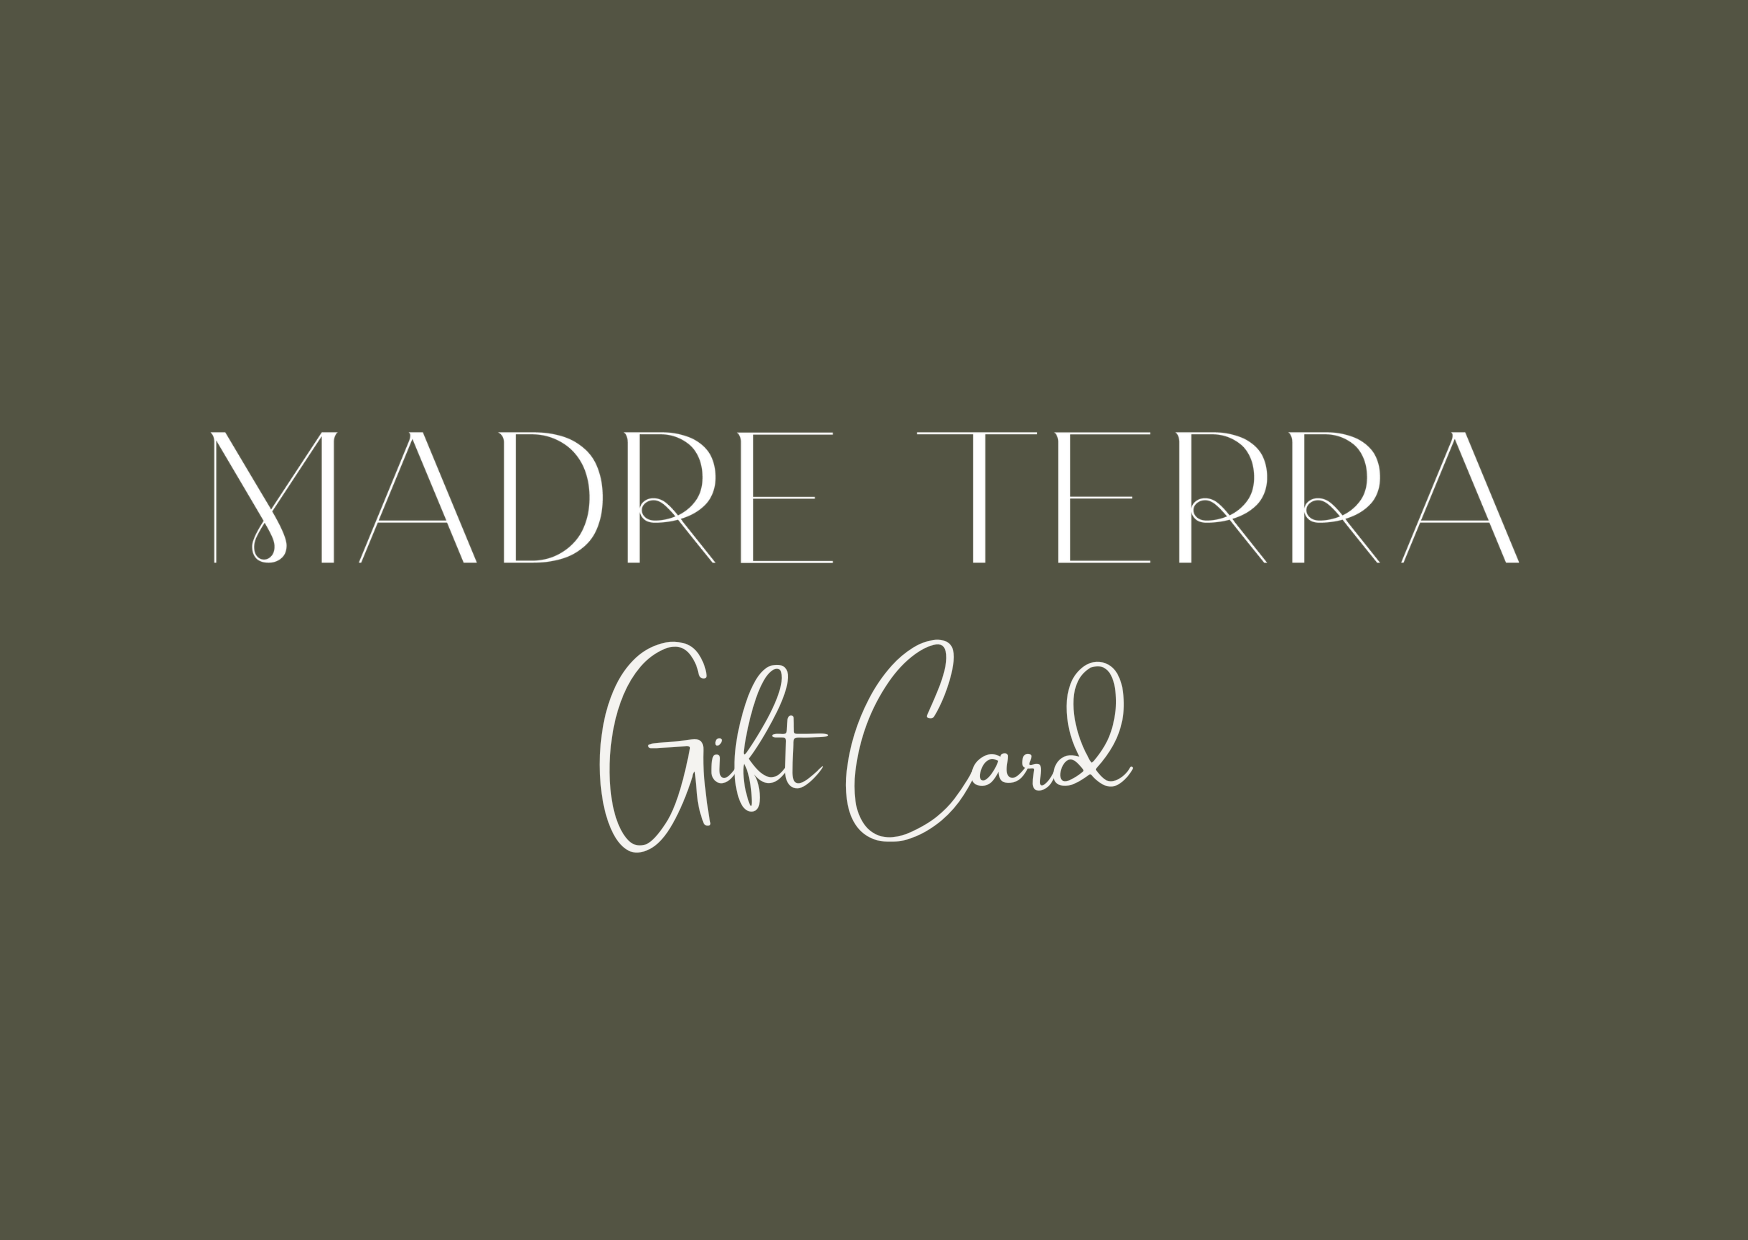 Madre Terra Gift Card